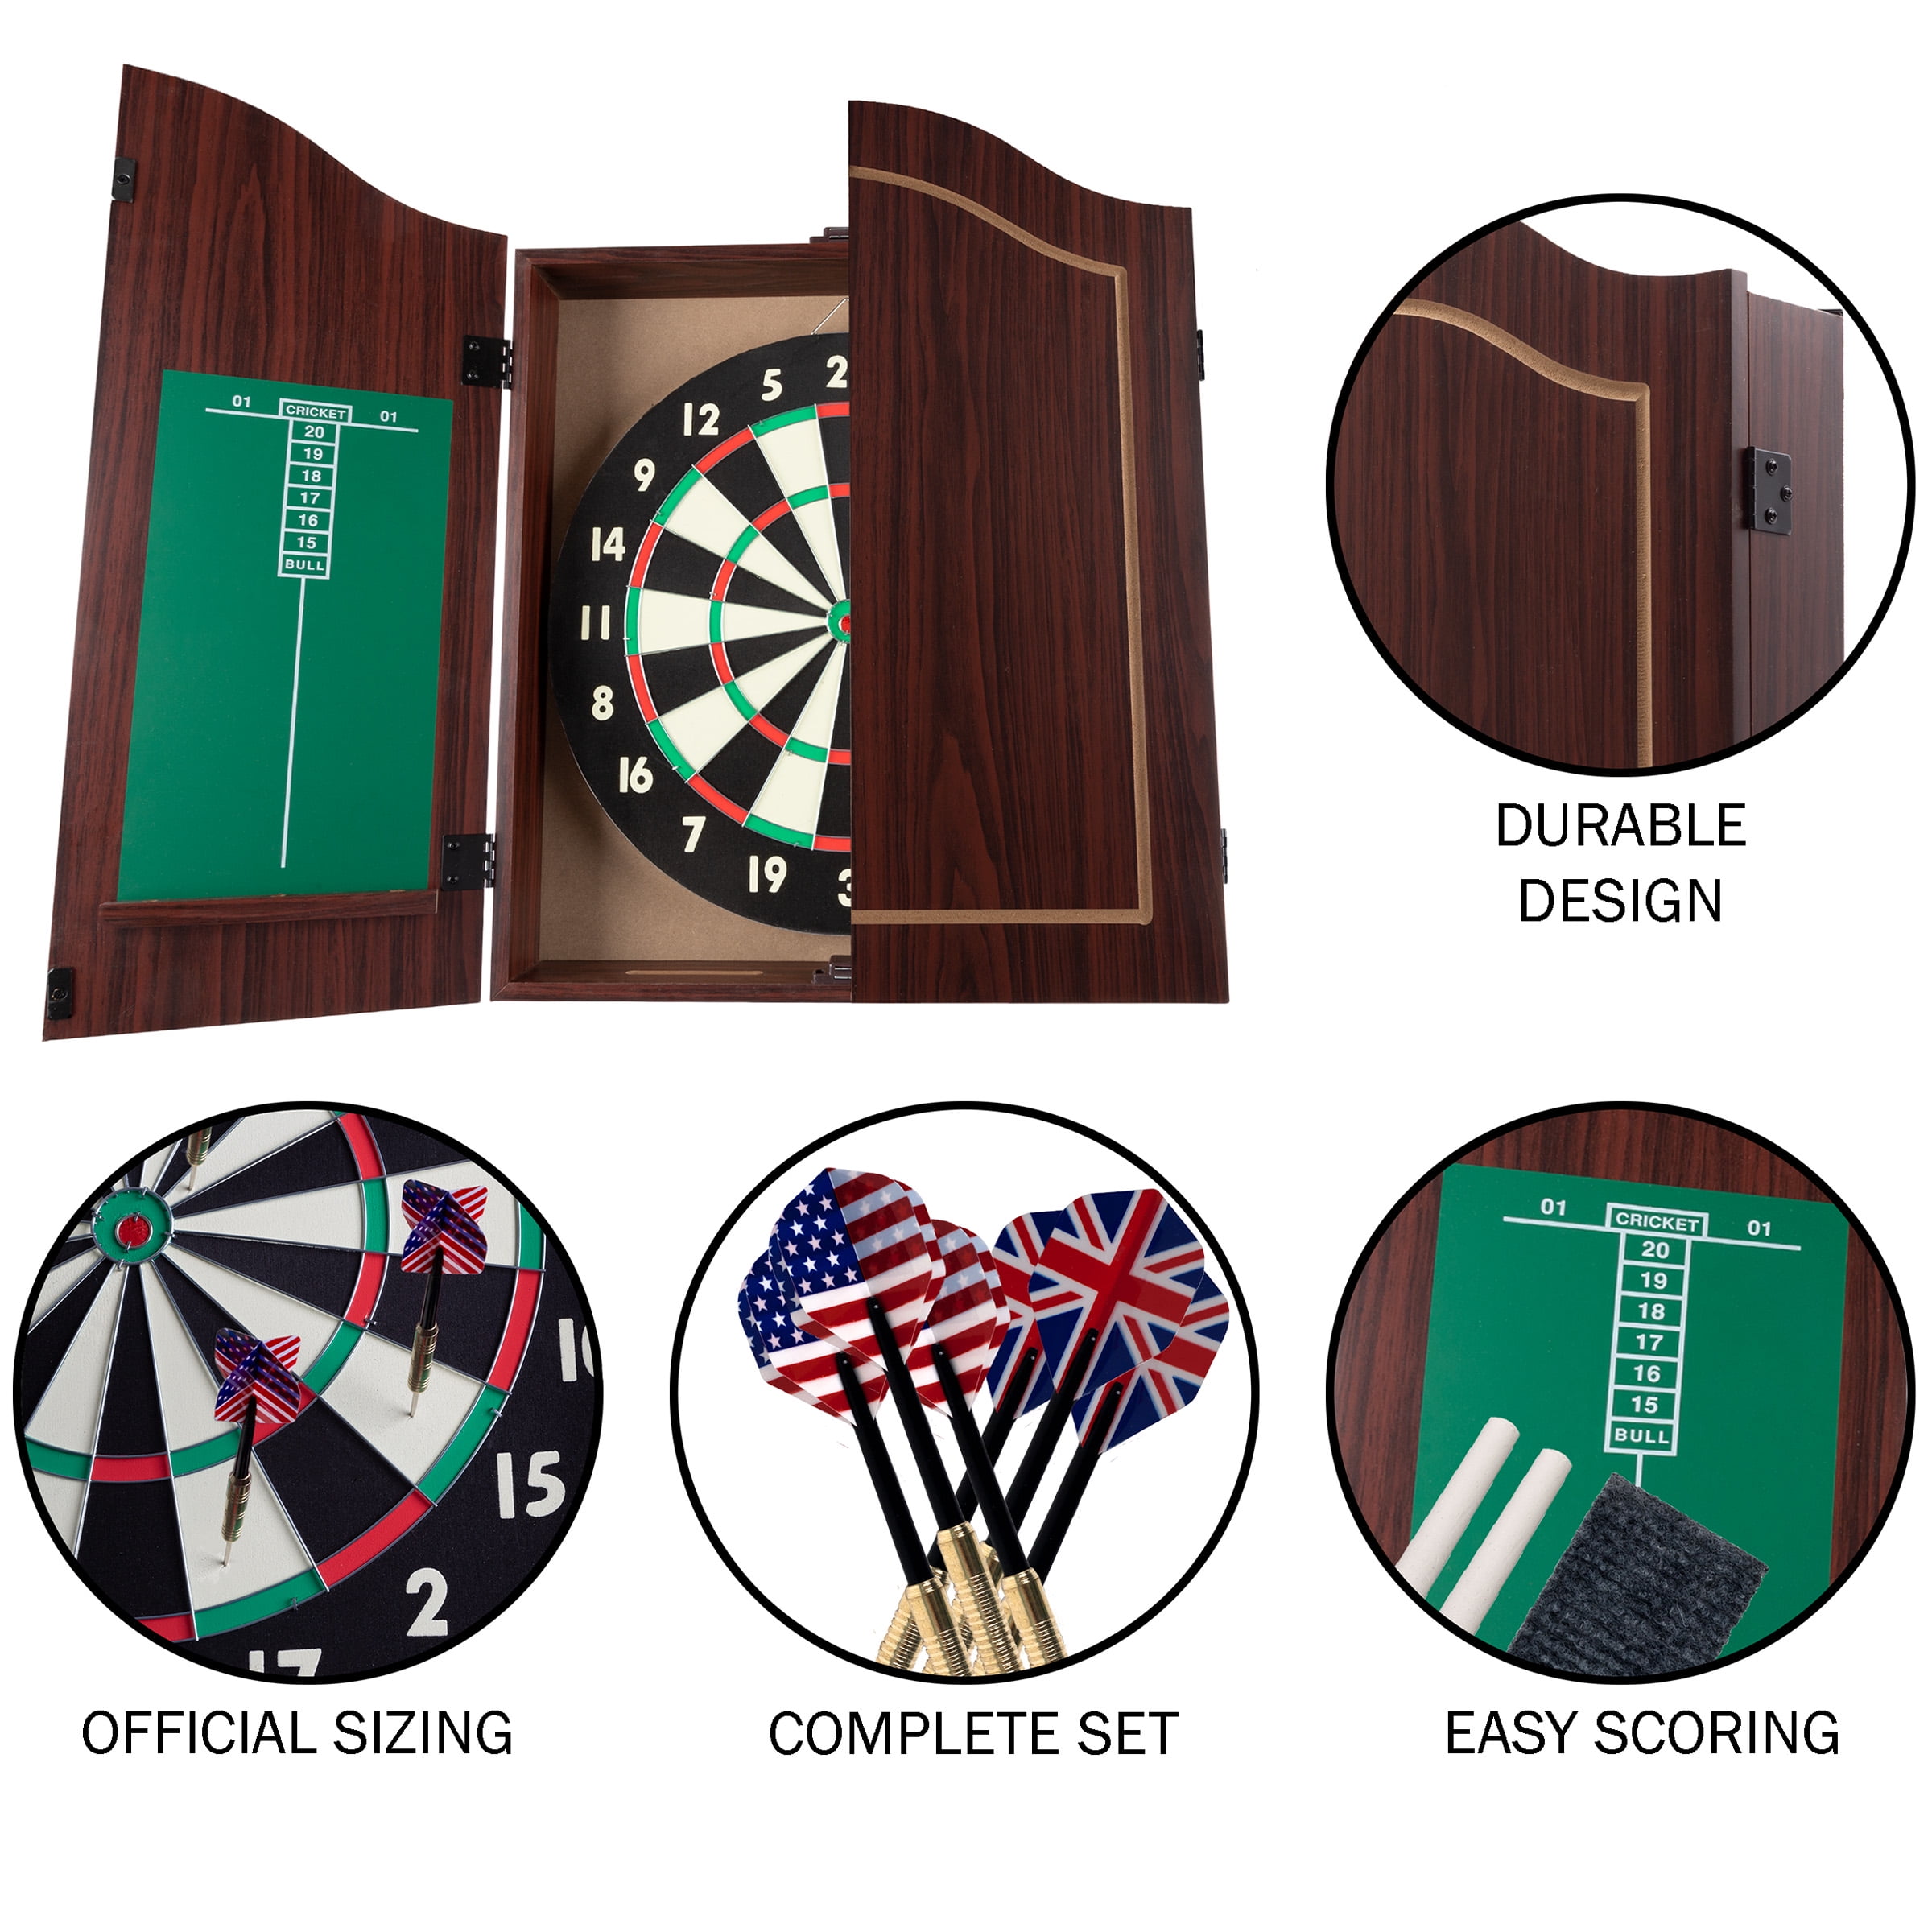 24 Bullseye Steel Tip Darts with Flights in Handy Carry and Store Jar Carrying Case 21 Grams Perfect for All Levels in Every Rec Room Bar and Game Room Man Cave 